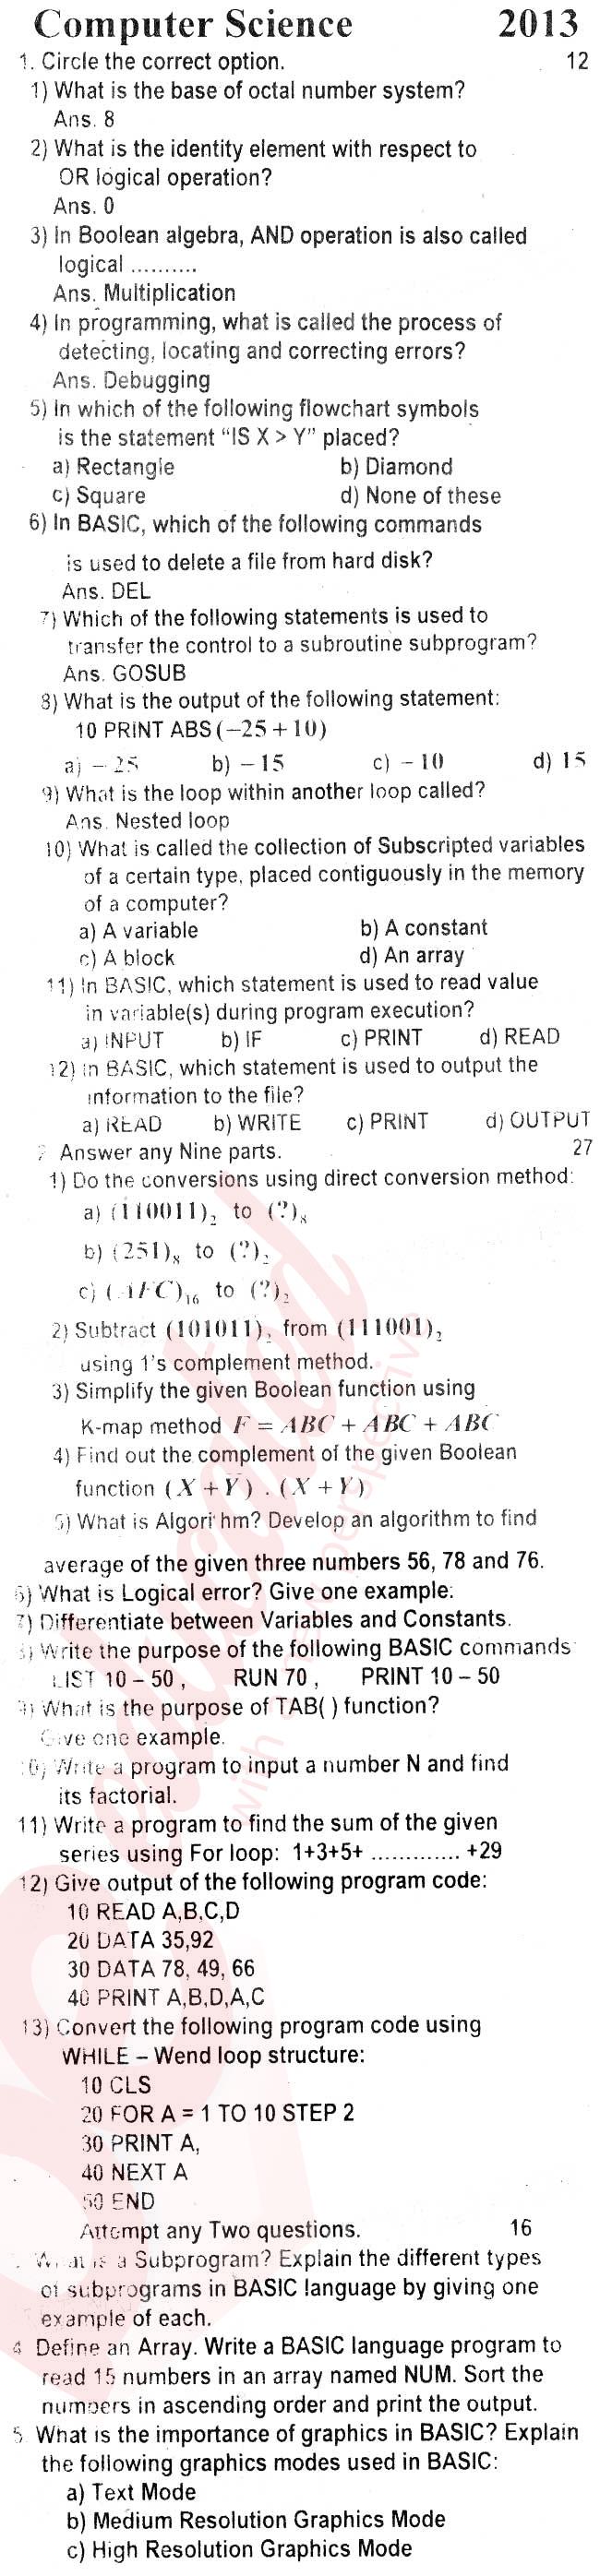 Computer Science 10th English Medium Past Paper Group 1 Federal BISE  2013